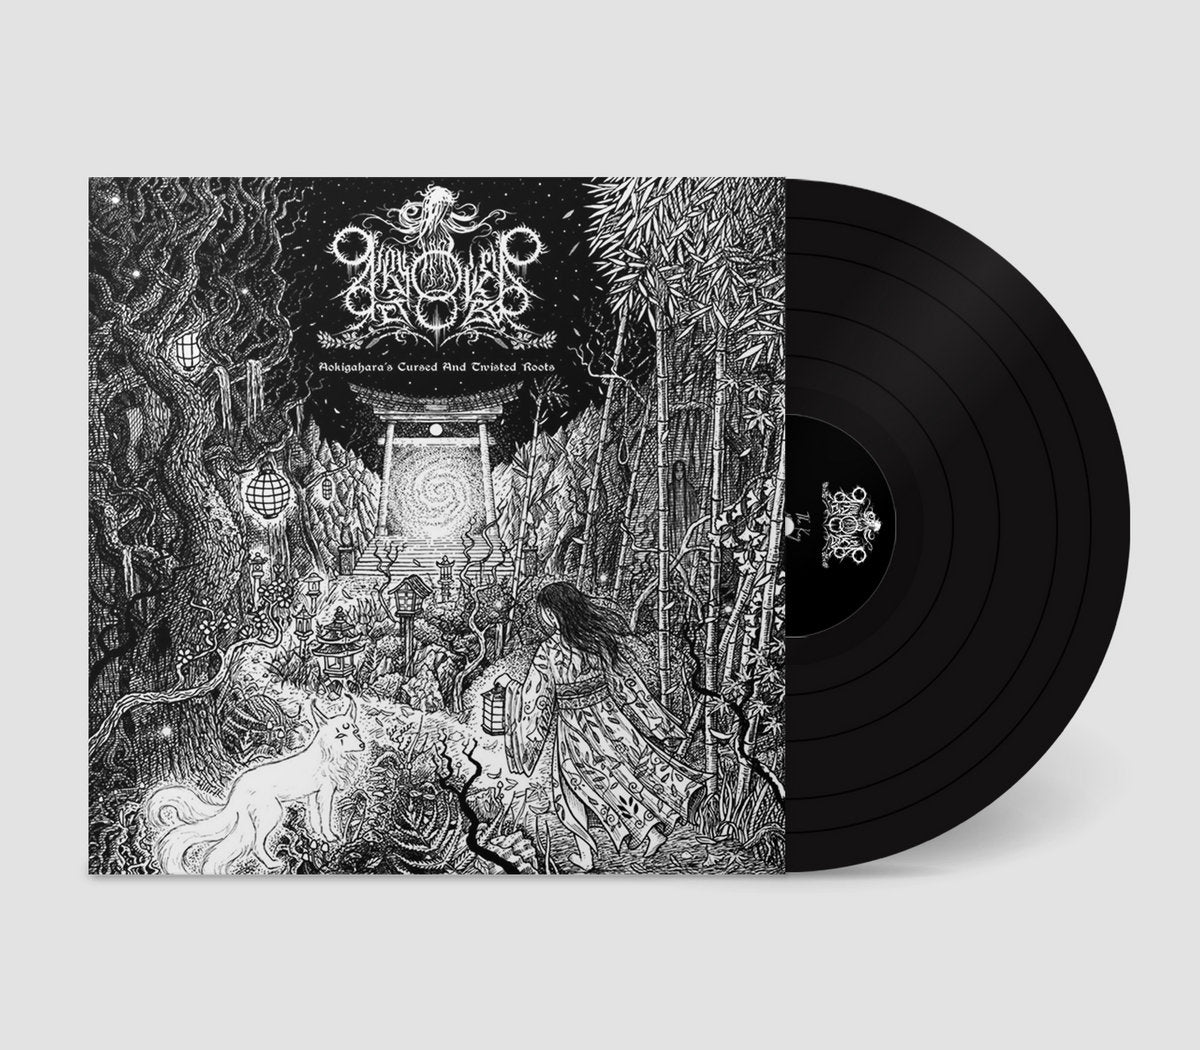 ONRYO OVER OCTOBER - Aokigahara's Cursed And Twisted Roots (12")